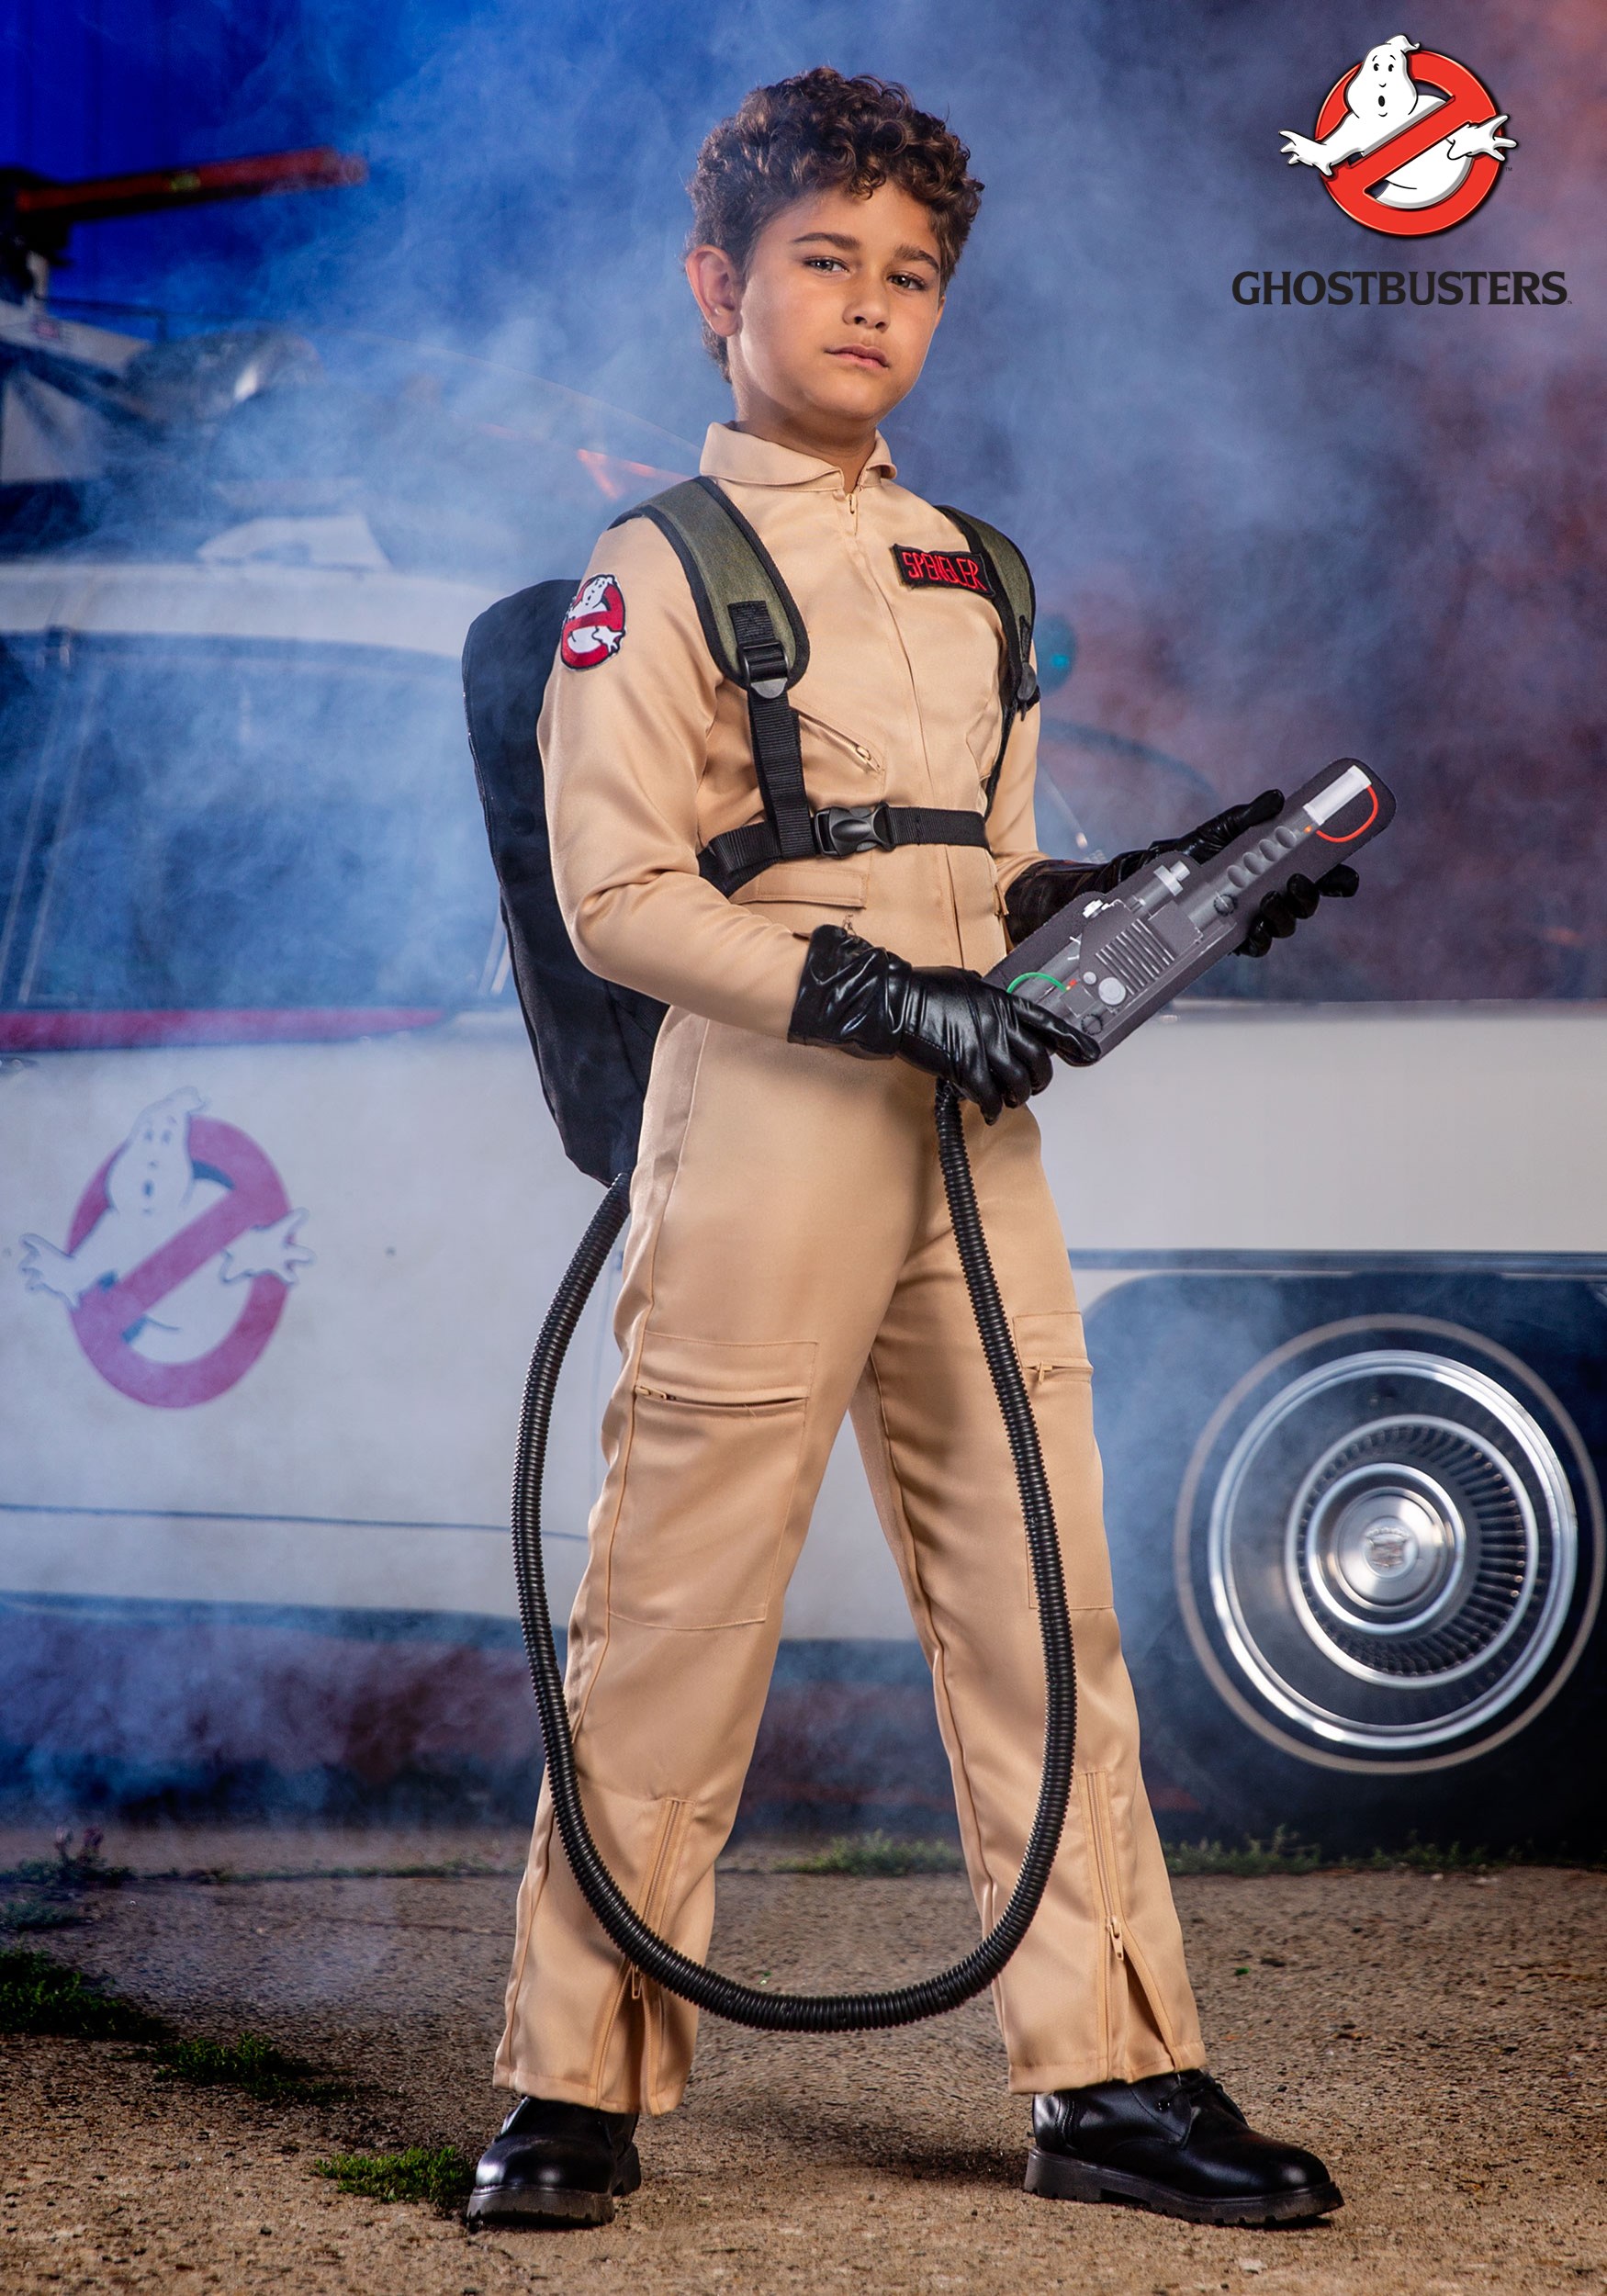 Details about   Strange Things Season 2 Cosplay Costume Ghostbusters Halloween Costumes 